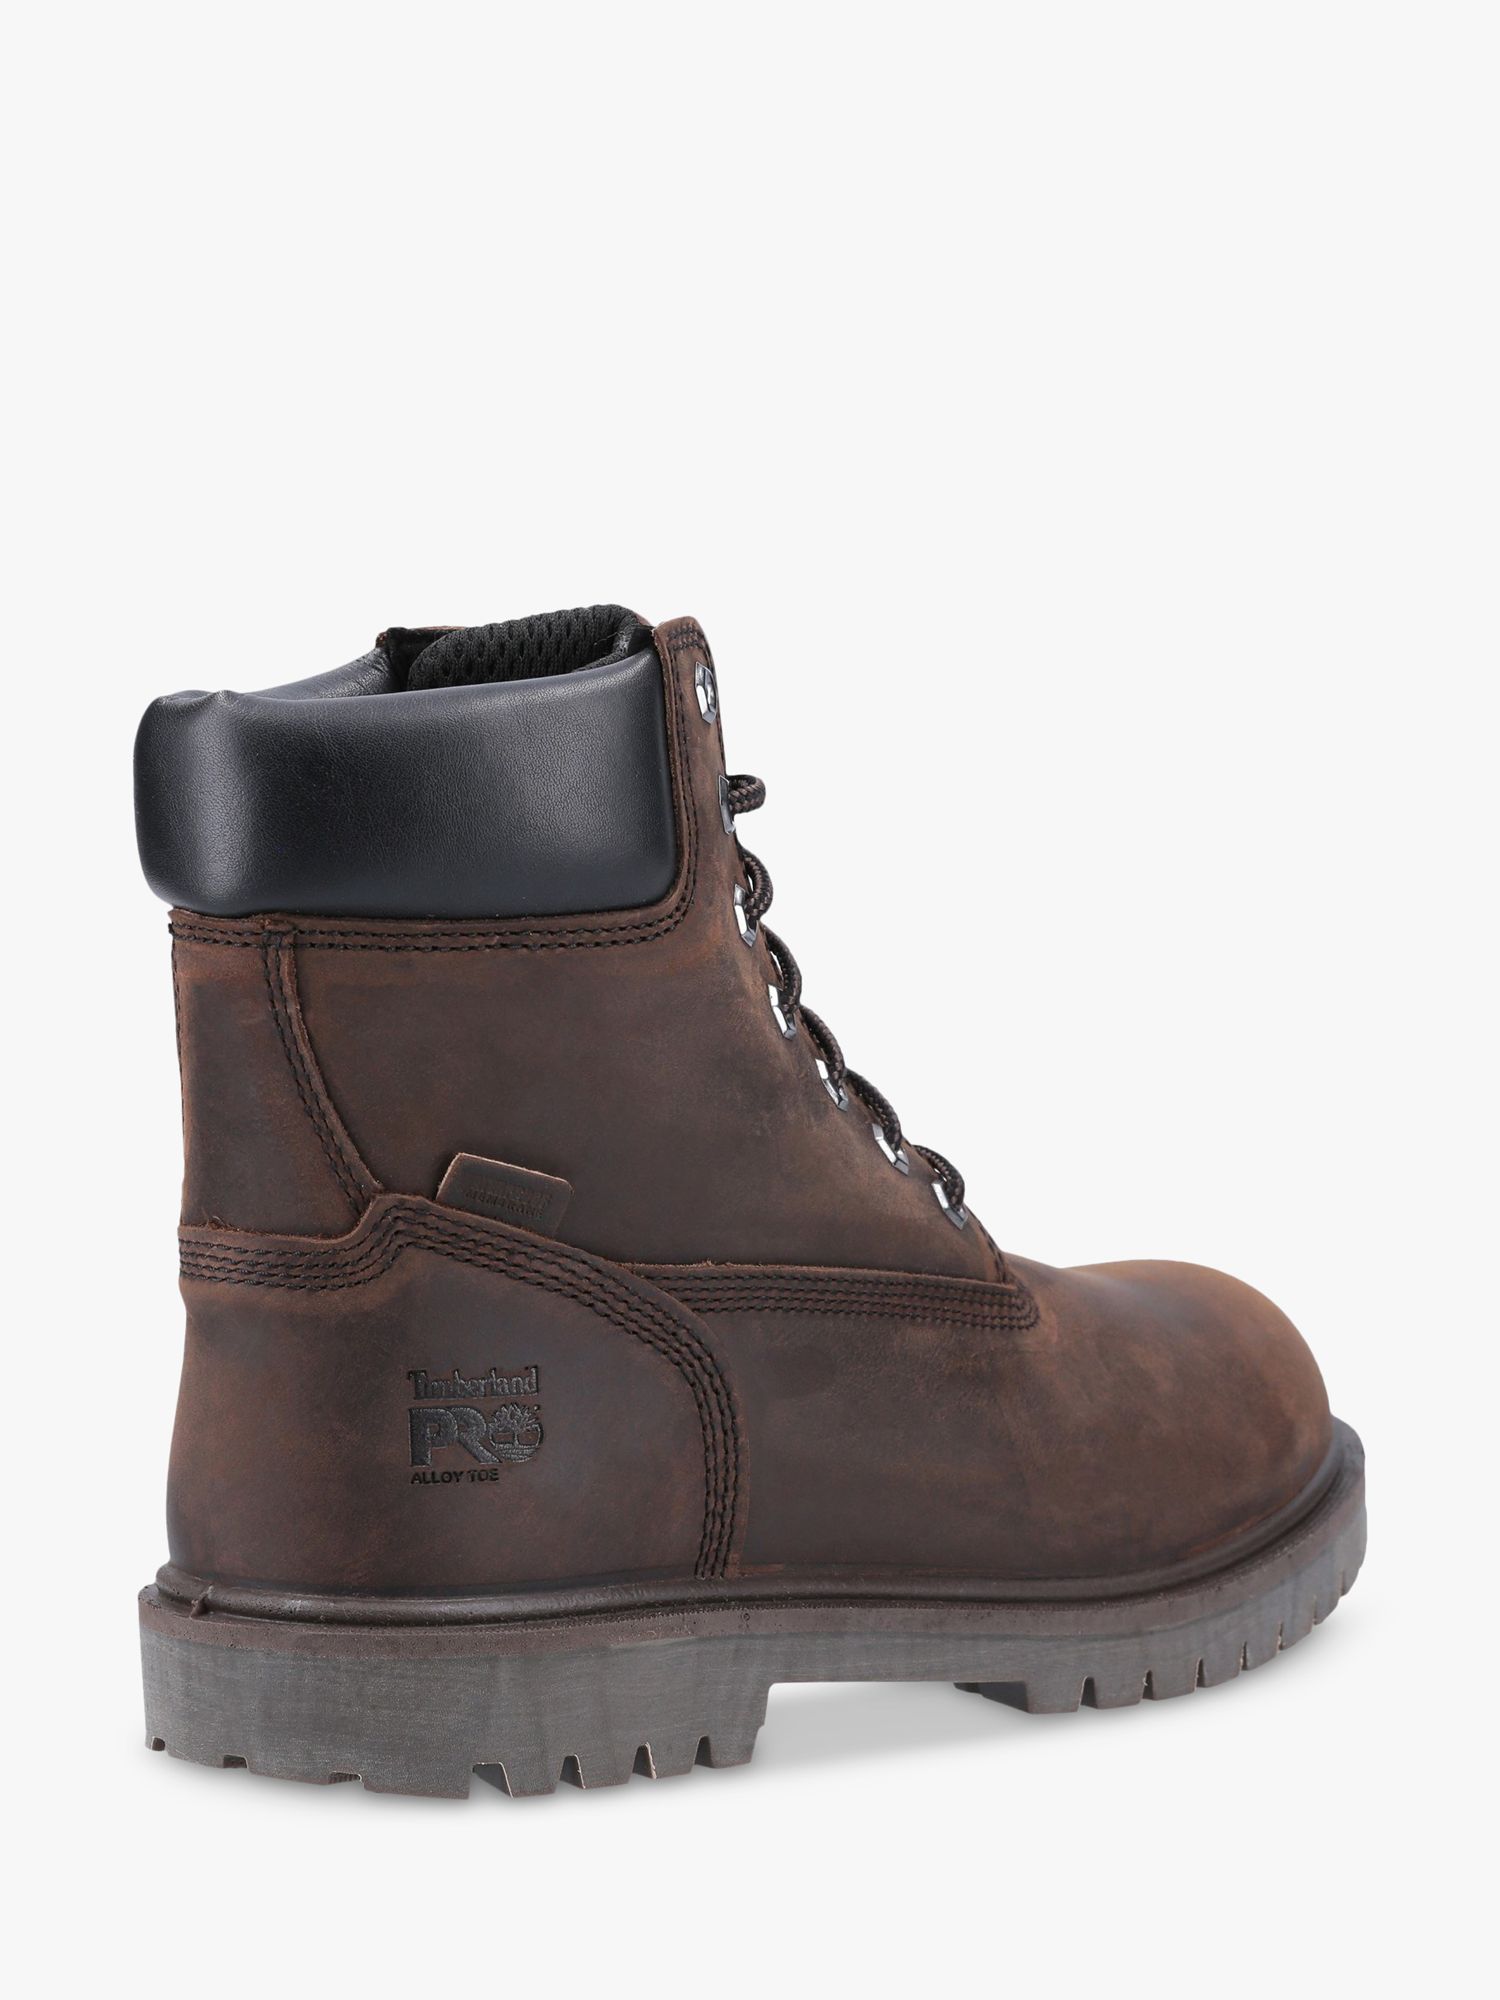 Timberland Pro Iconic Safety Toe Waterproof Work Boots at John Lewis ...